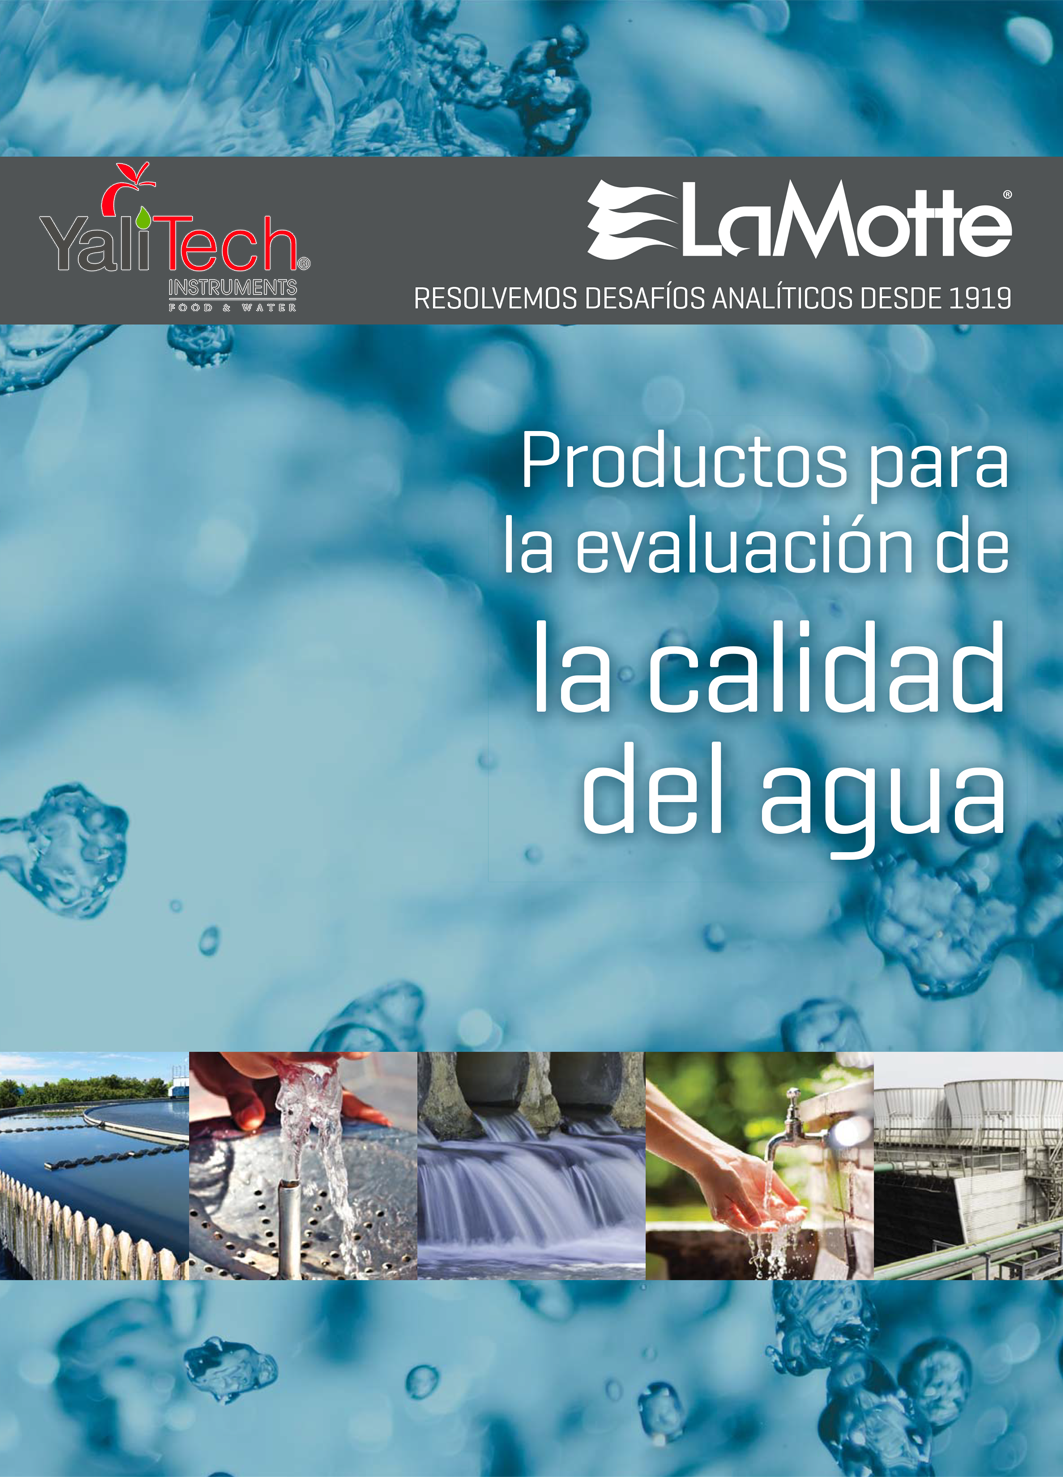 https://yalitech.cl/media/files/catalogs/images/Catalogo_LaMotte_General.png